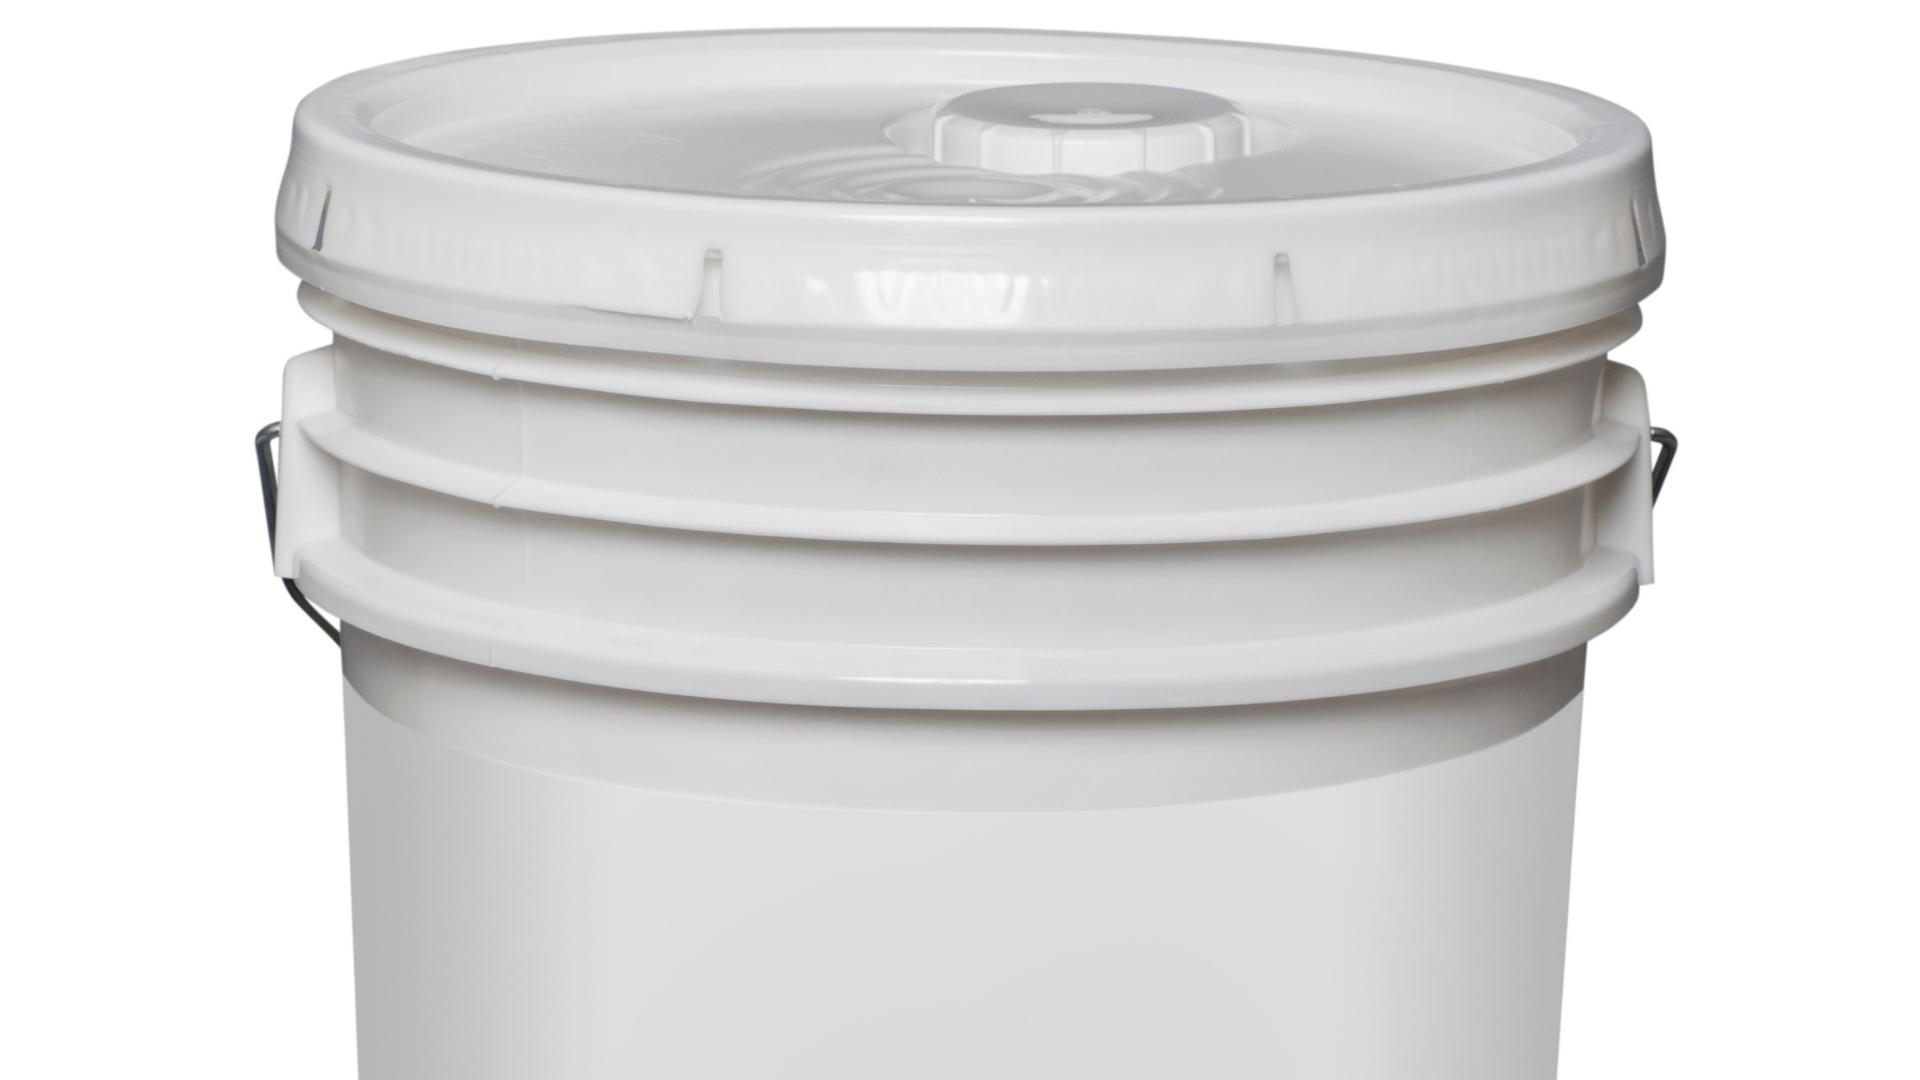 Photo of a 5-gallon bucket with a snap-on lid as an RV sewer hose storage option